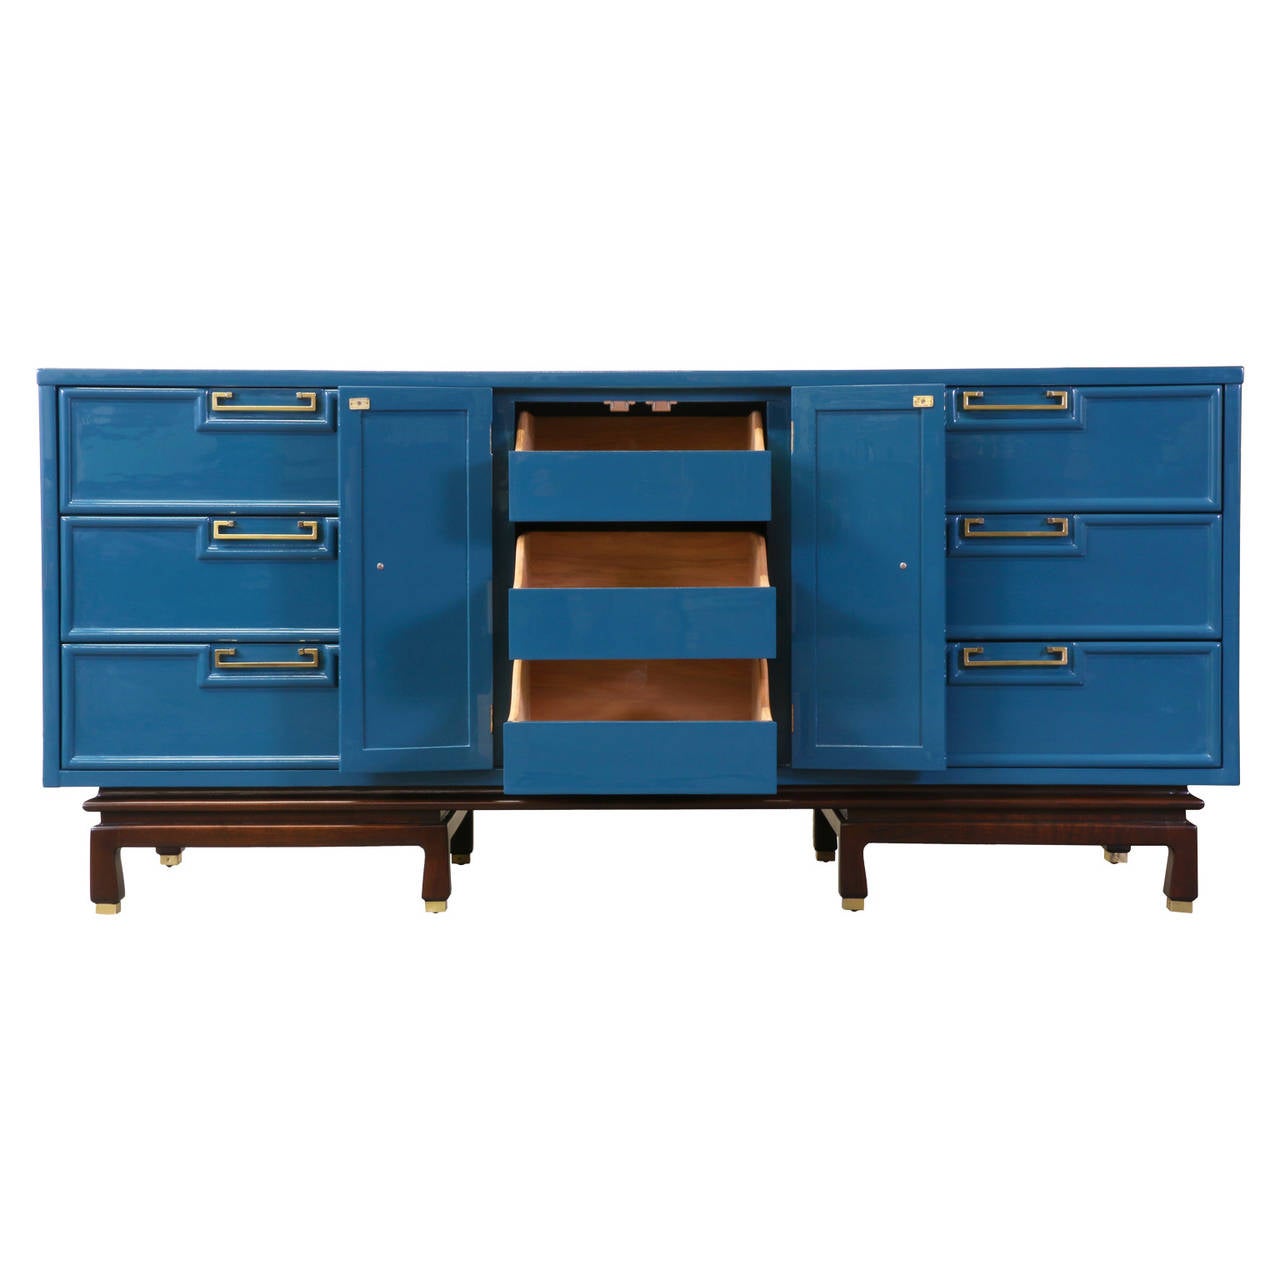 Designer: American of Martinsville
Manufacturer: American of Martinsville
Period/Style: Mid Century Modern
Country: United States
Date: 1960s

Dimensions: 28.5″H x 68″L 35.5″W
Extension Leafs 14.25″
Total Extension 96.5″
Materials: Lacquer,